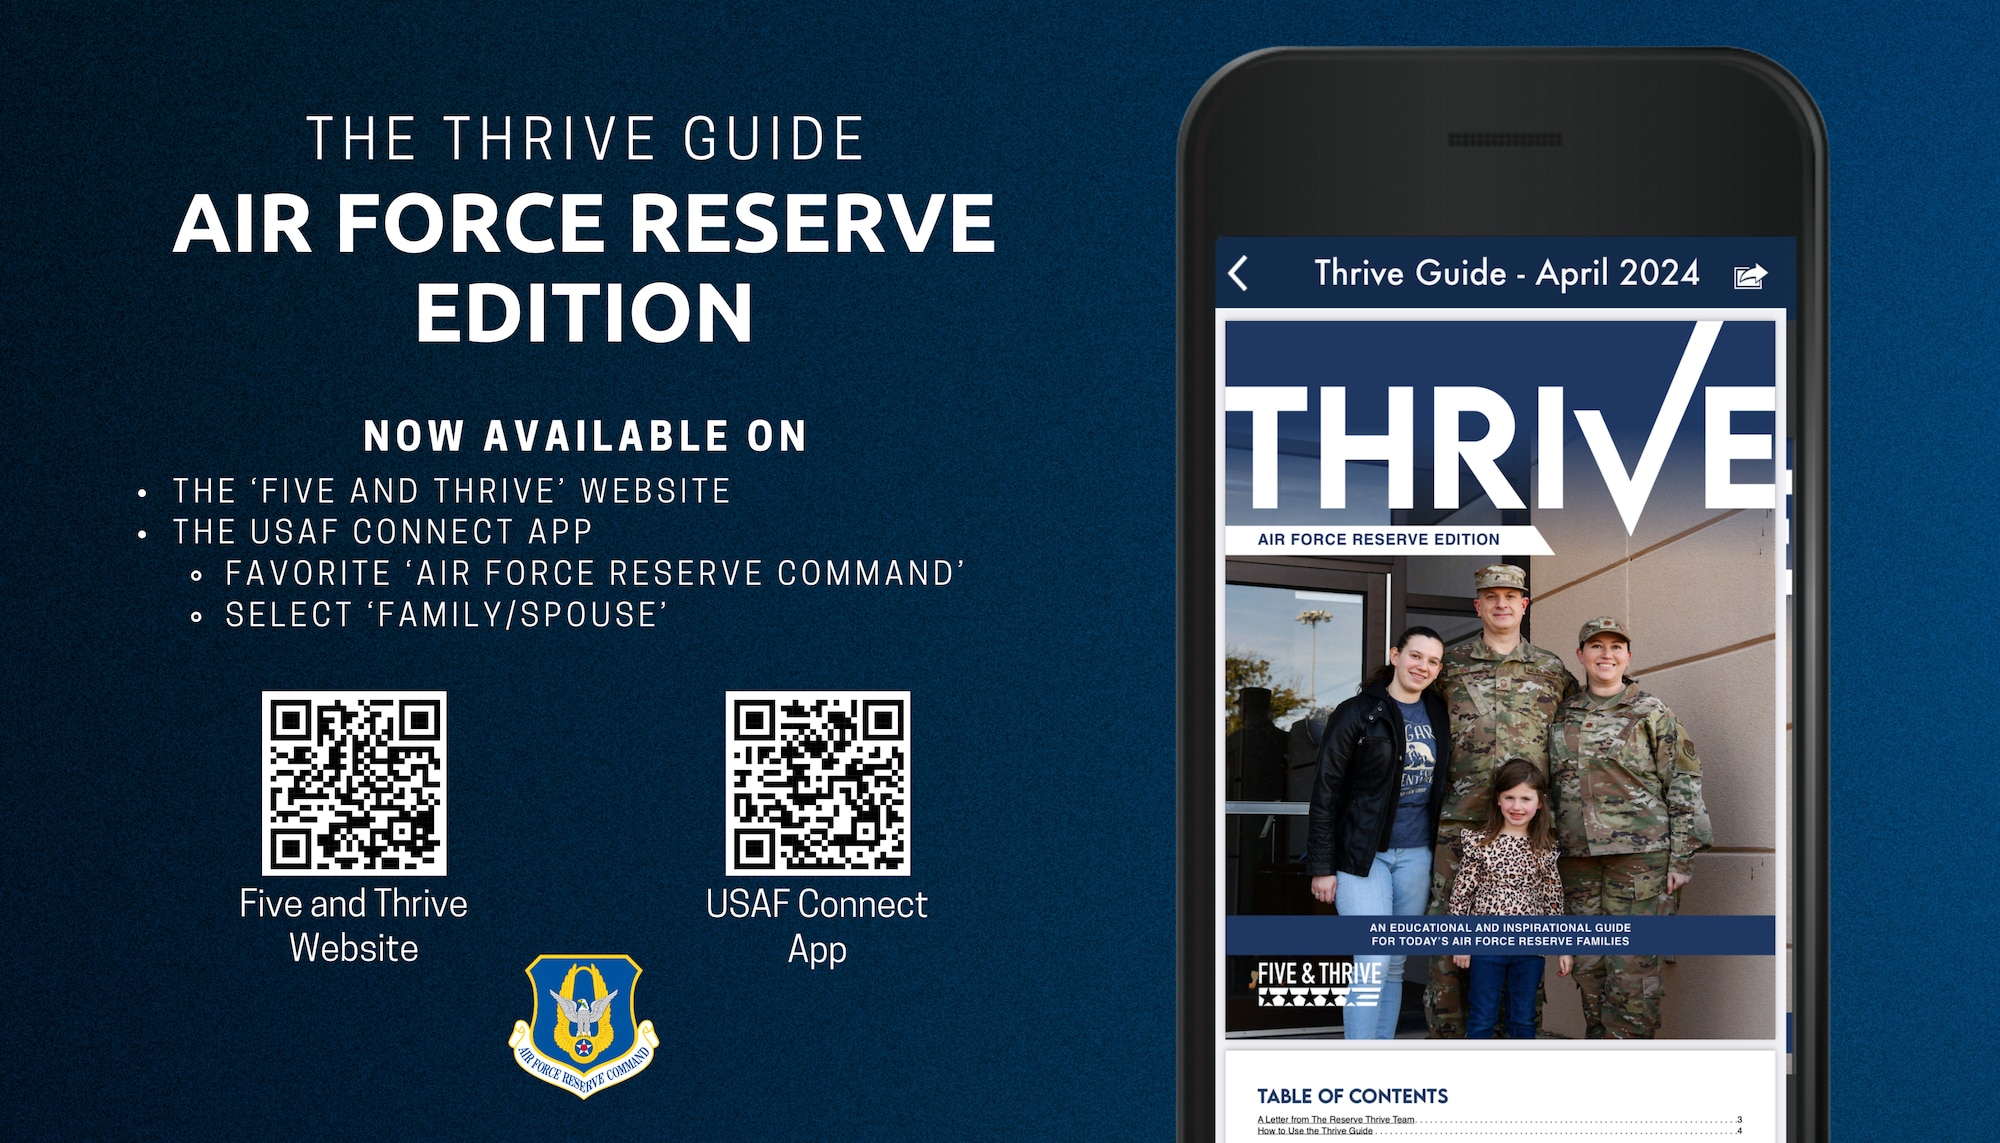 Graphic with QR codes that will direct to the Air Force Reserve Edition of the Thrive Guide on either the Thrive and Five website or the USAF Connect App.